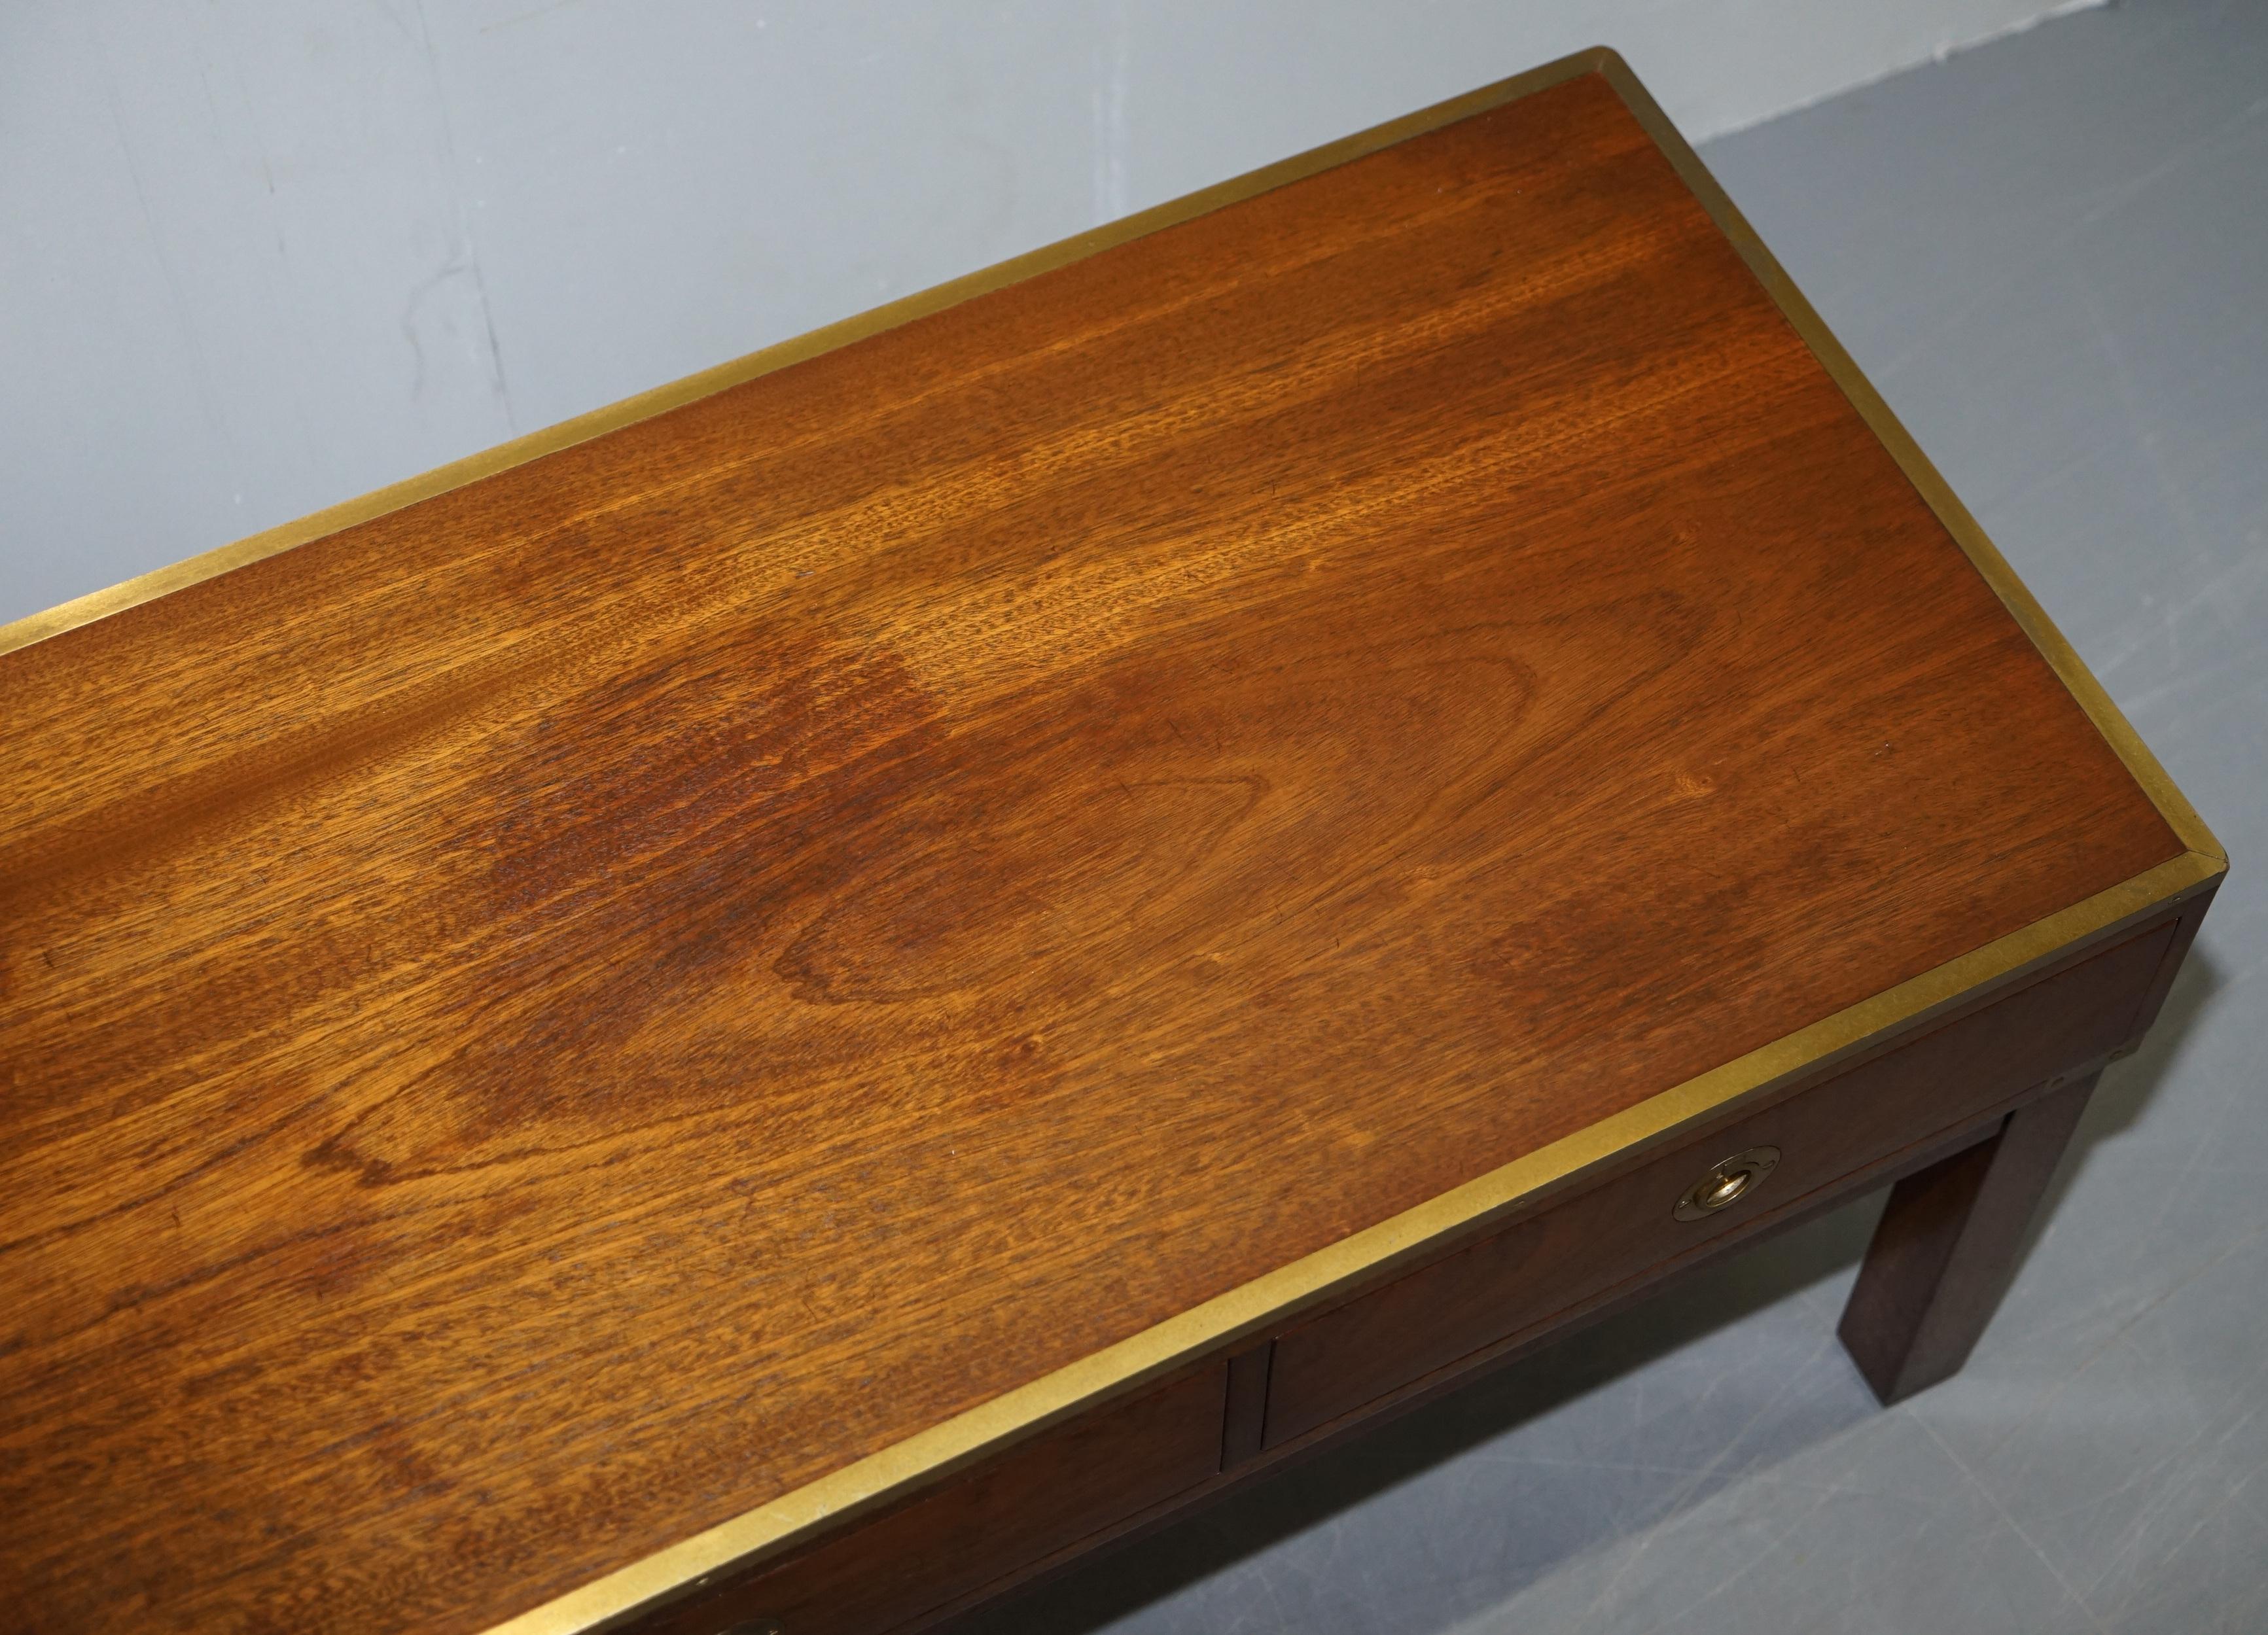 Harrods Kennedy Military Campaign Hardwood Coffee Table Part of Large Suite 3